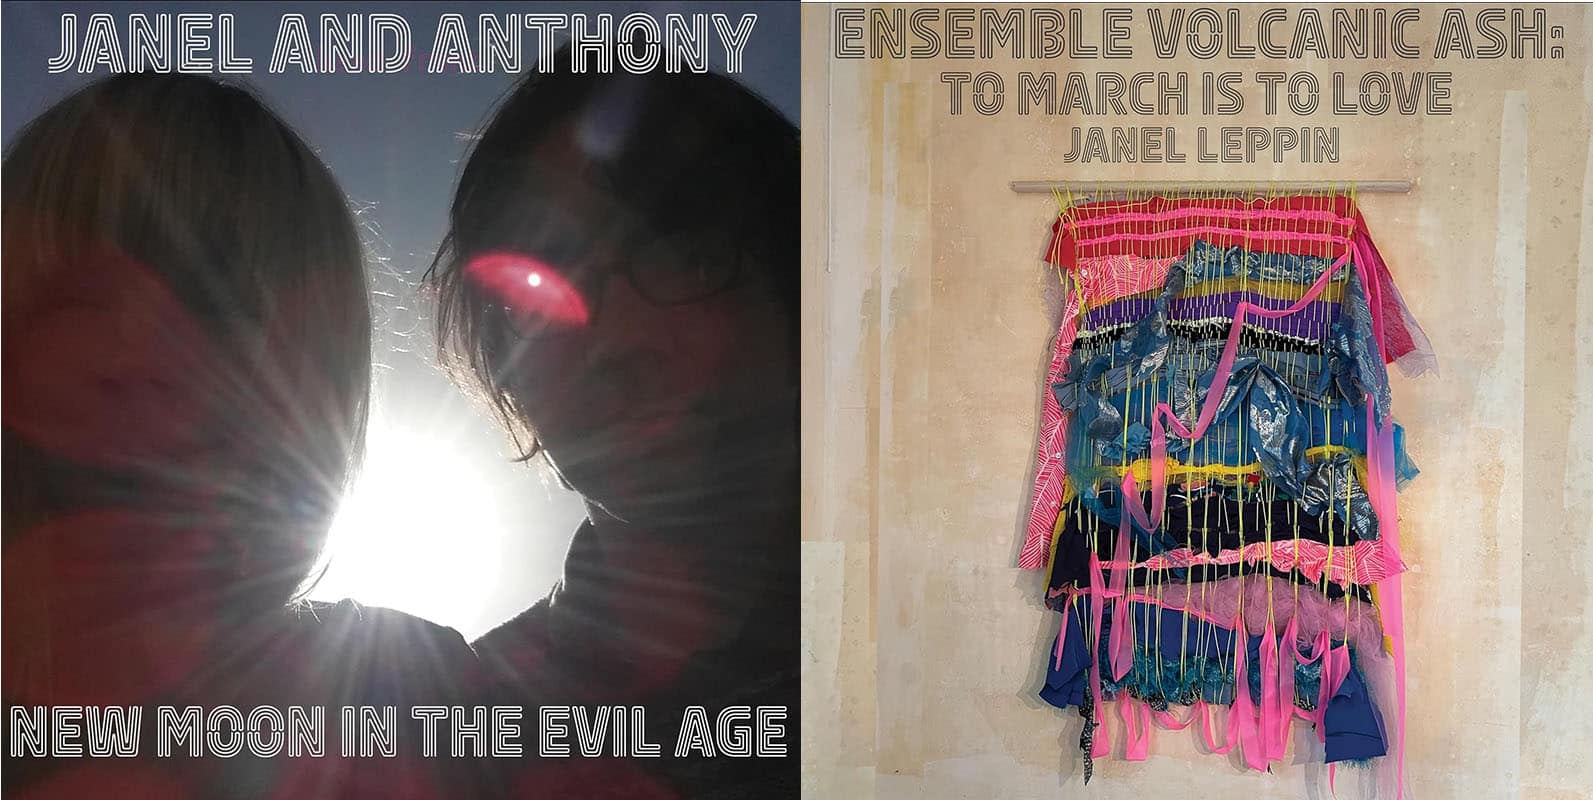 Janel and Anthony  New Moon in the Evil Age - Janel Leppin’s Ensemble Volcanic Ash  To March is to Love